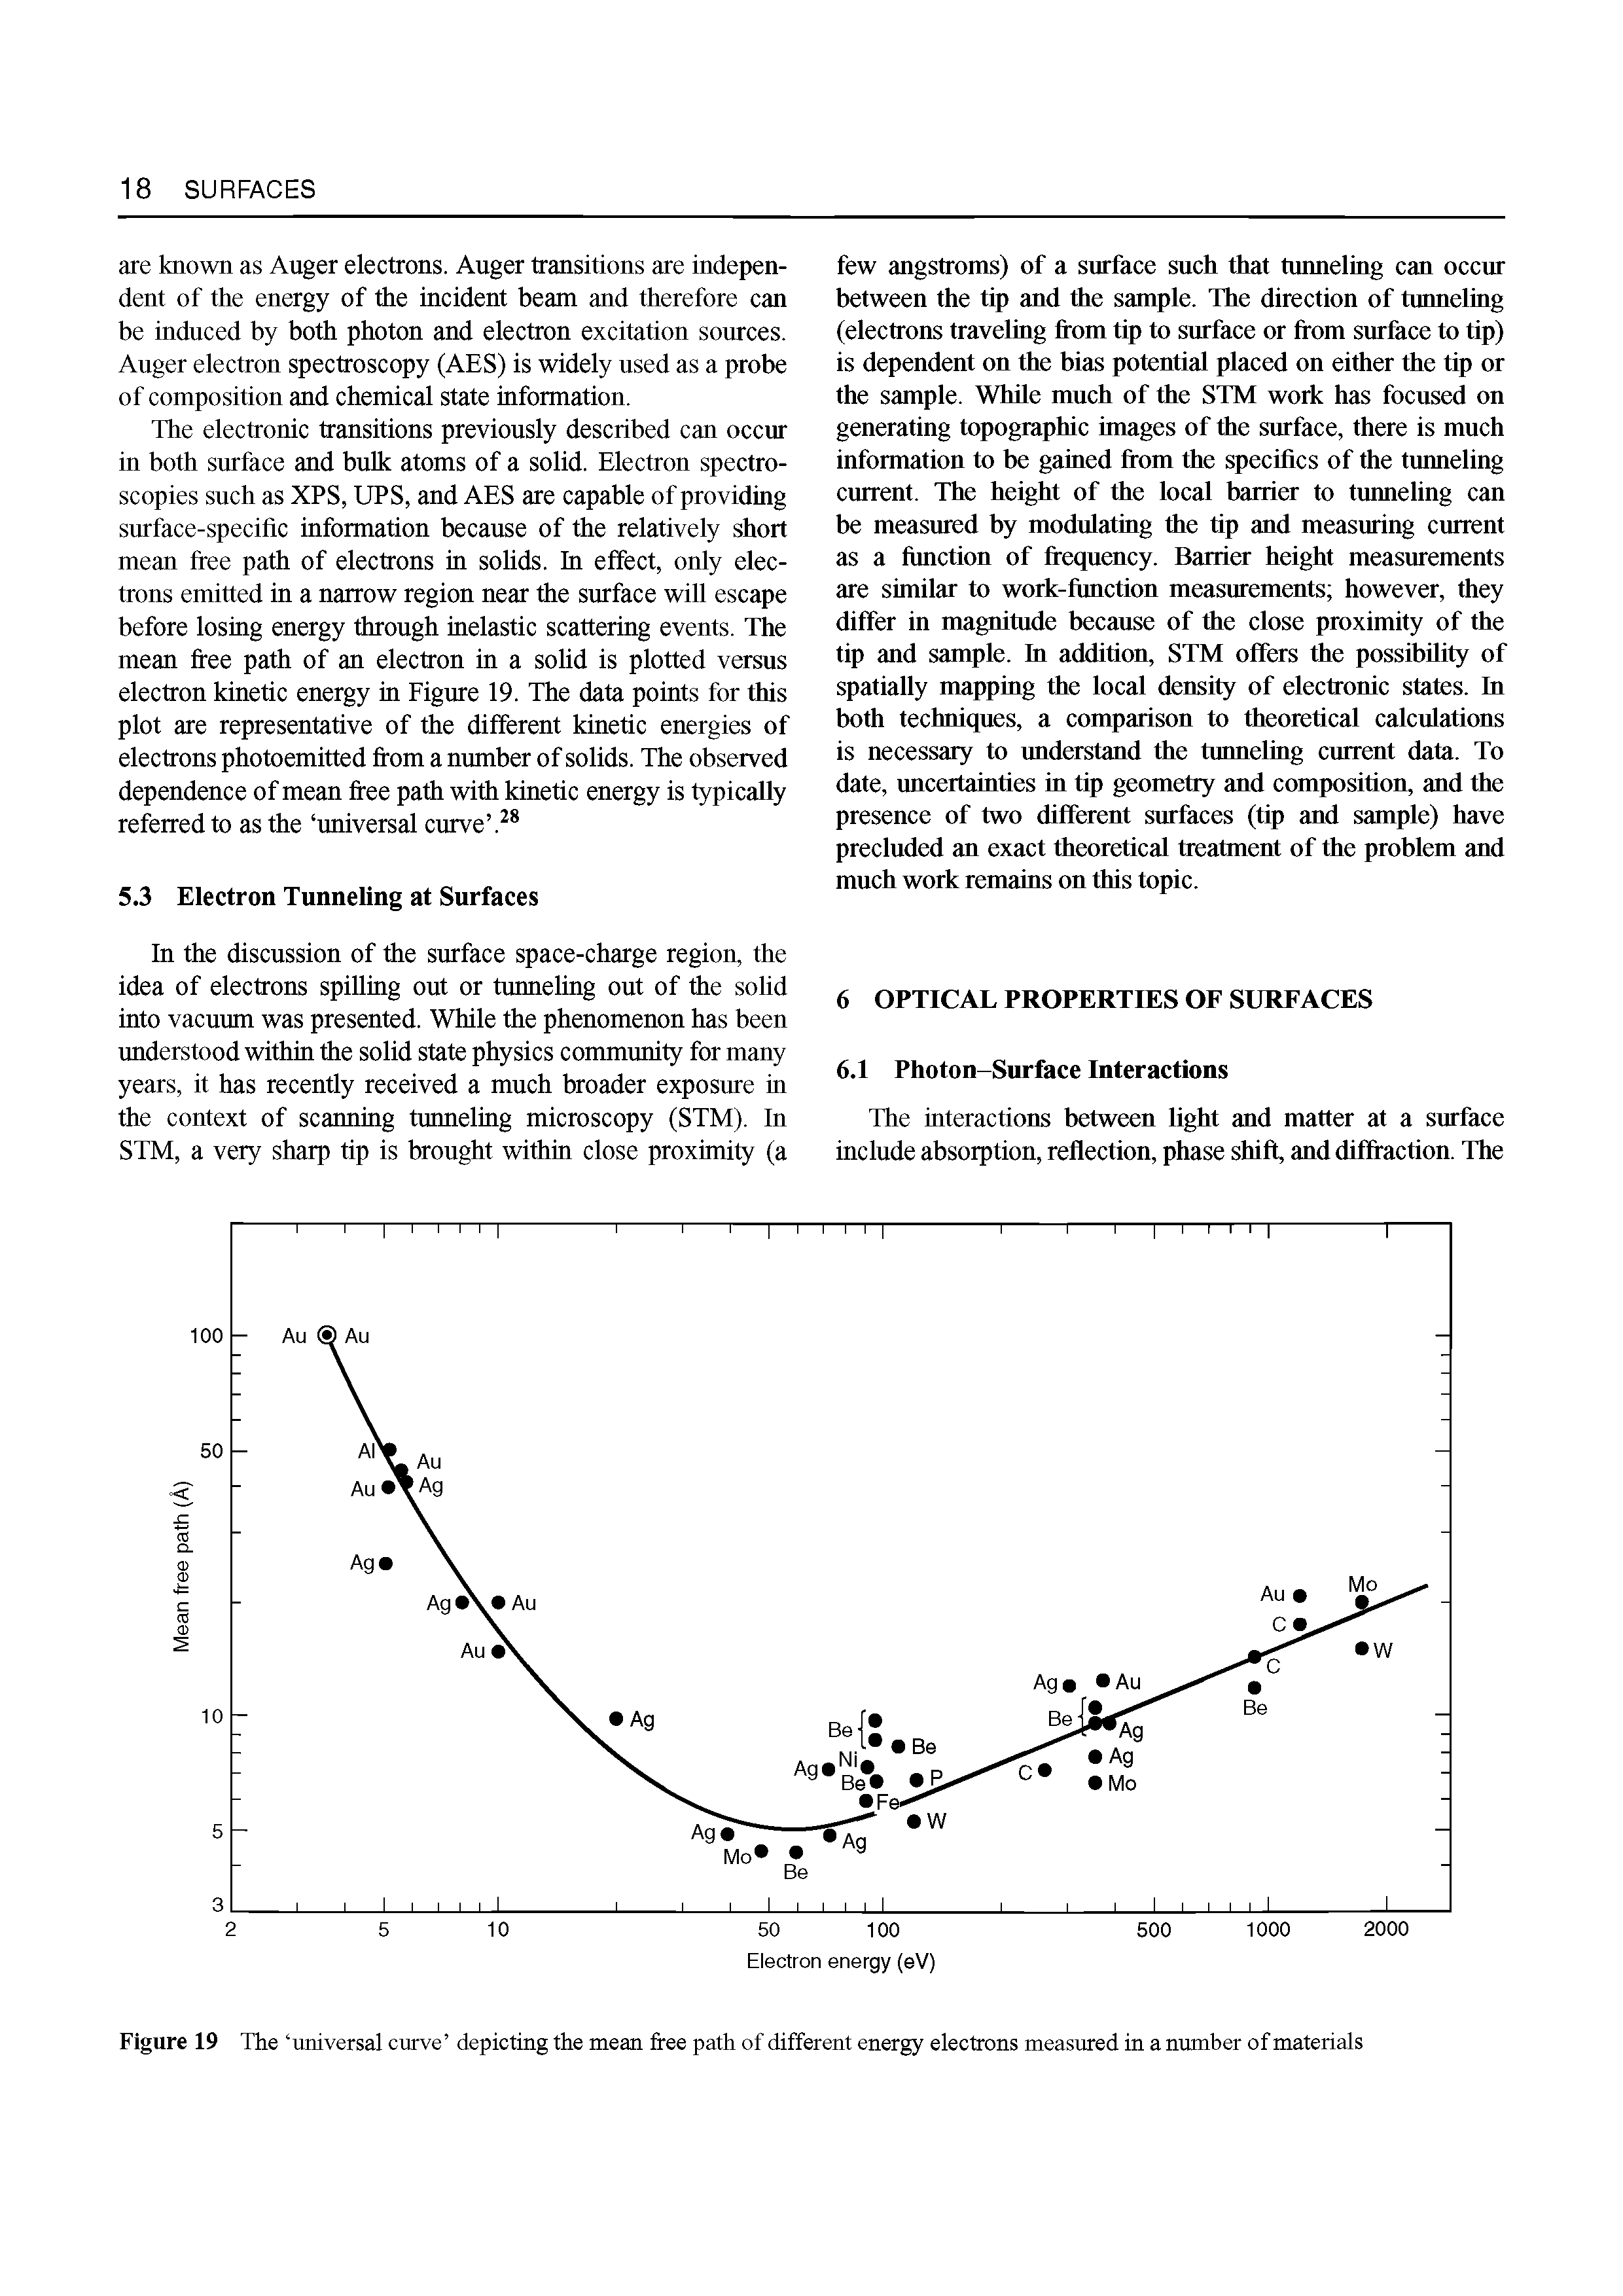 Figure 19 The universal curve depicting the mean free path of different energy electrons measured in a number of materials...